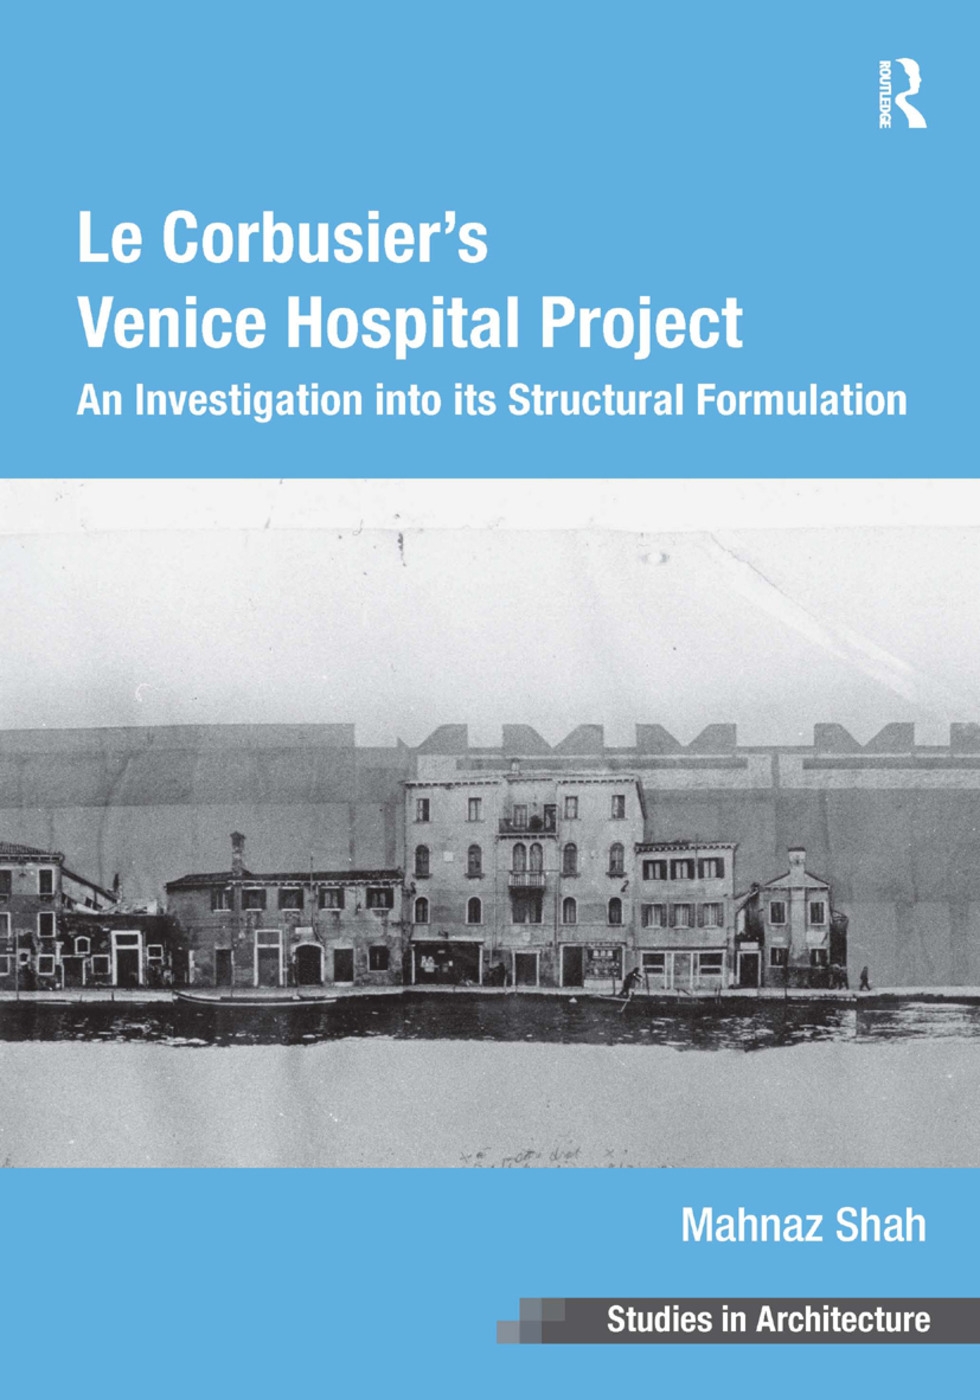 Le Corbusier’s Venice Hospital Project: An Investigation Into Its Structural Formulation